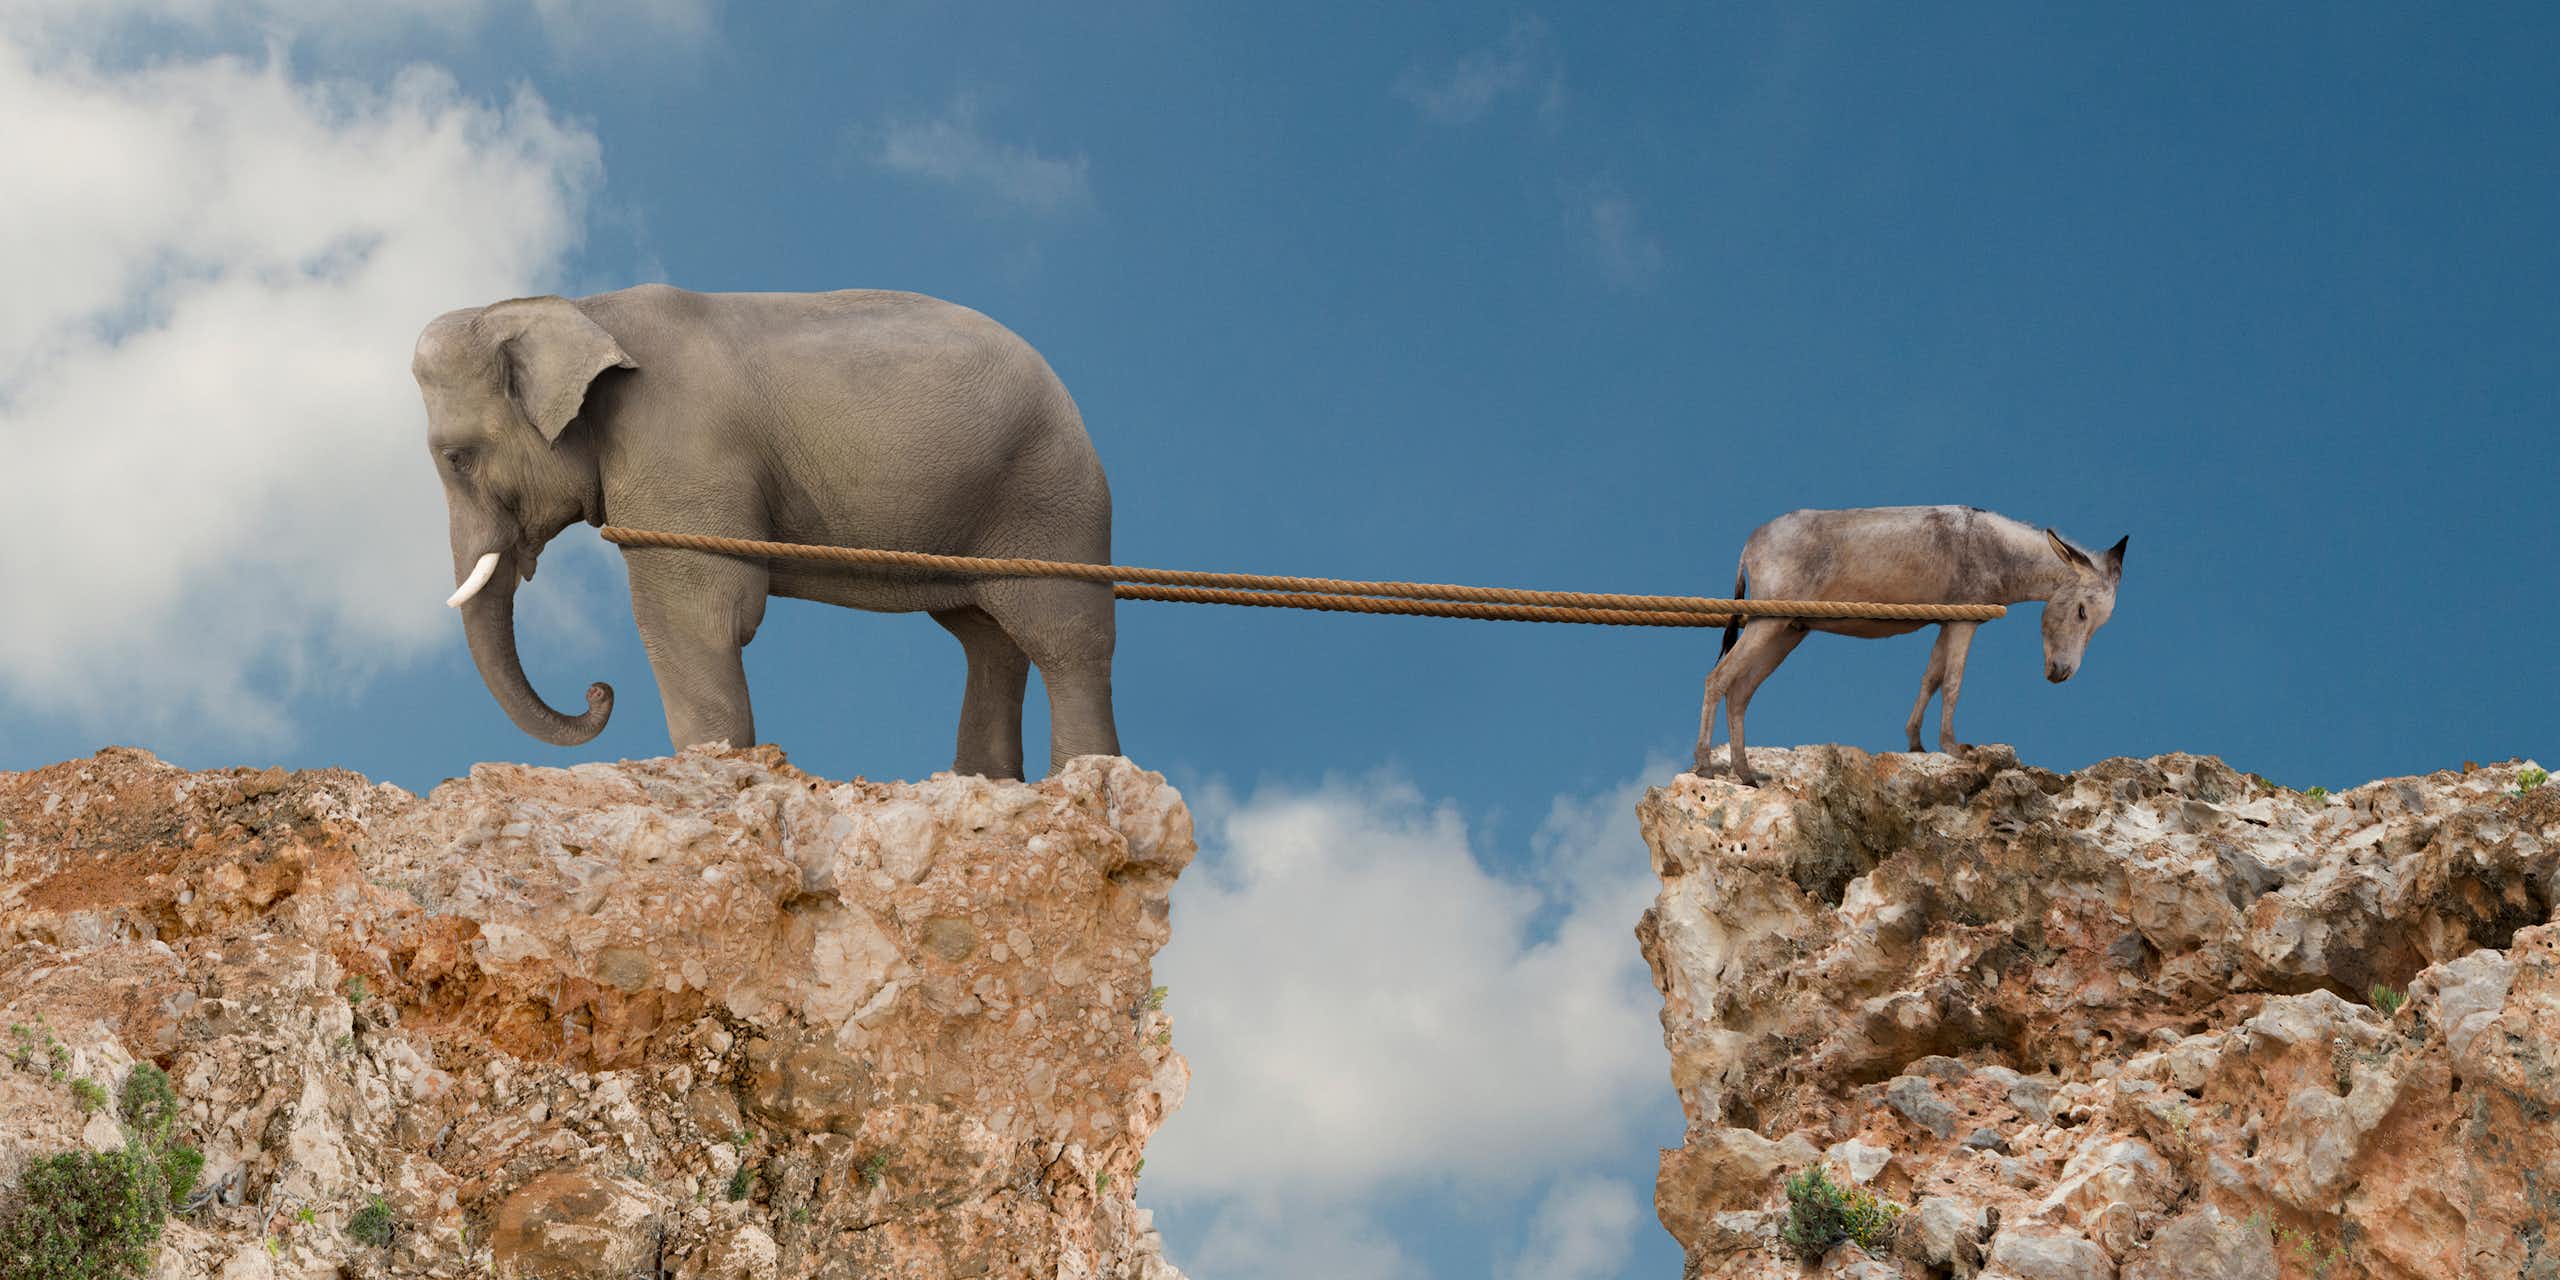 In a photo illustration, an elephant and donkey are seen playing tug-of-war over a canyon.